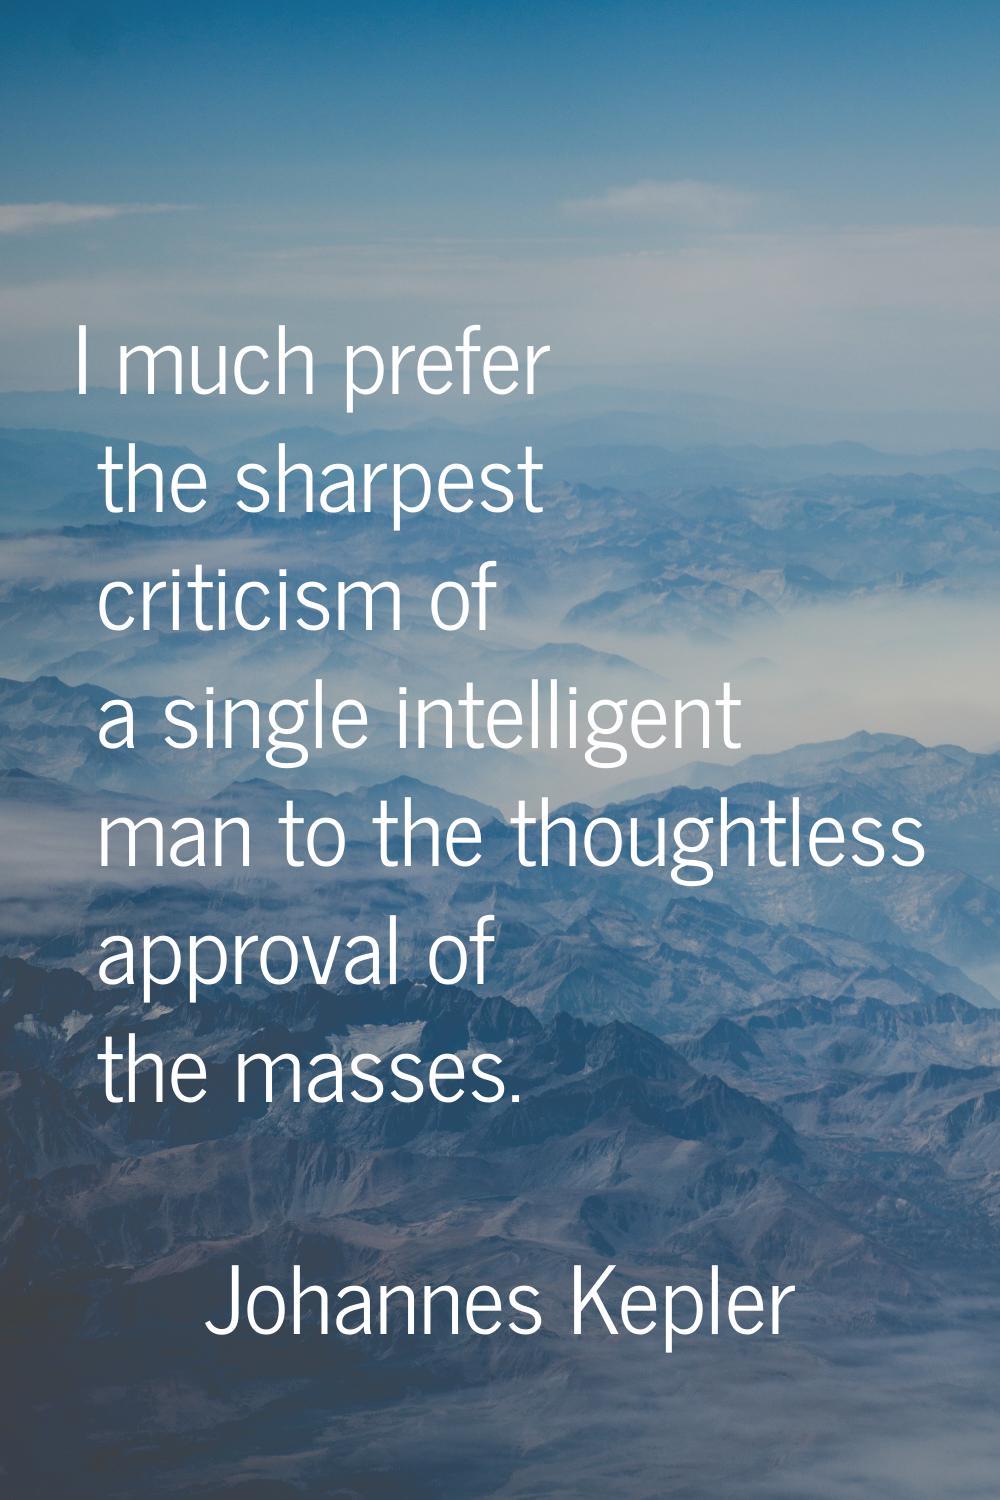 I much prefer the sharpest criticism of a single intelligent man to the thoughtless approval of the